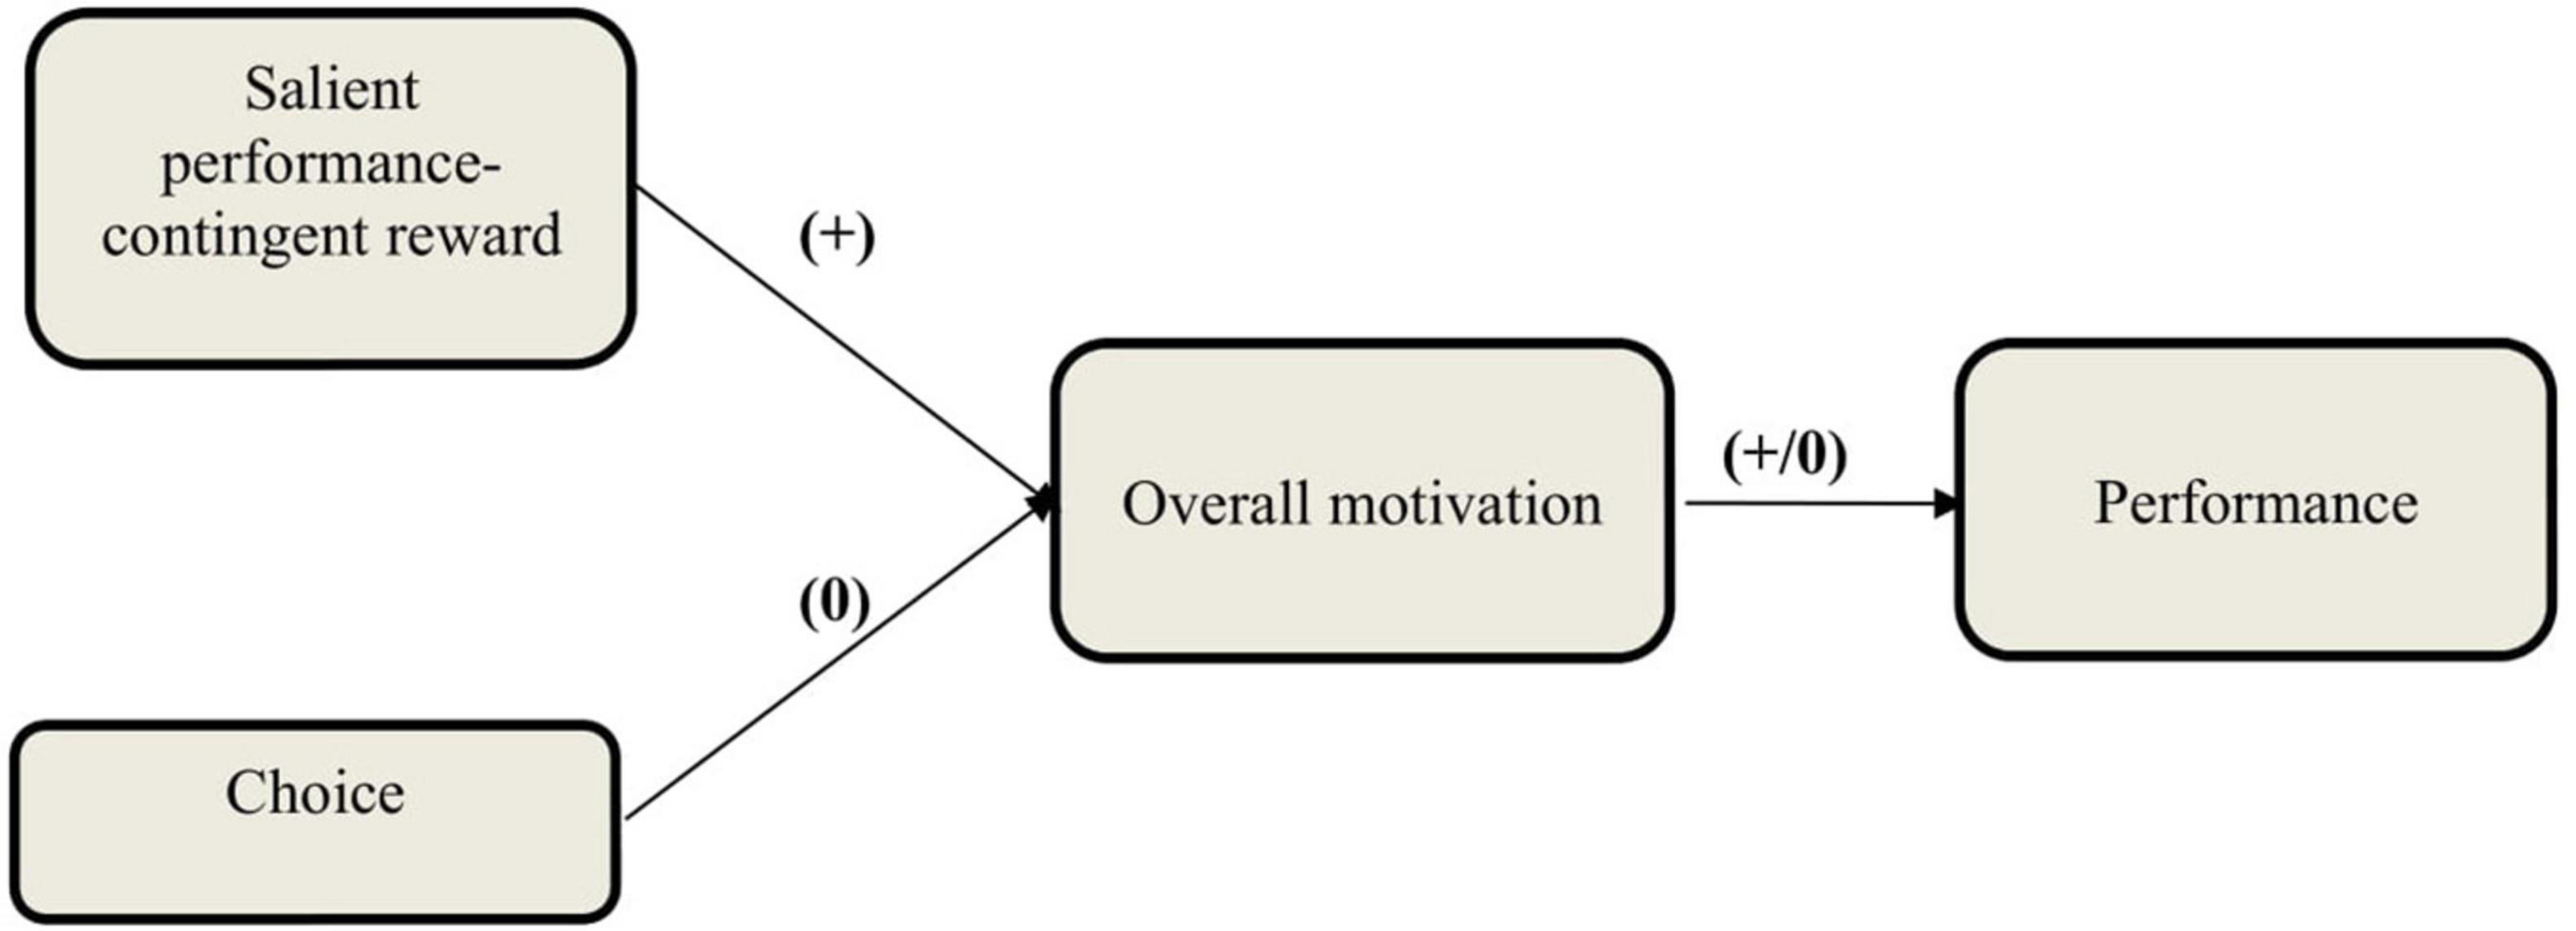 porter and lawler theory of motivation